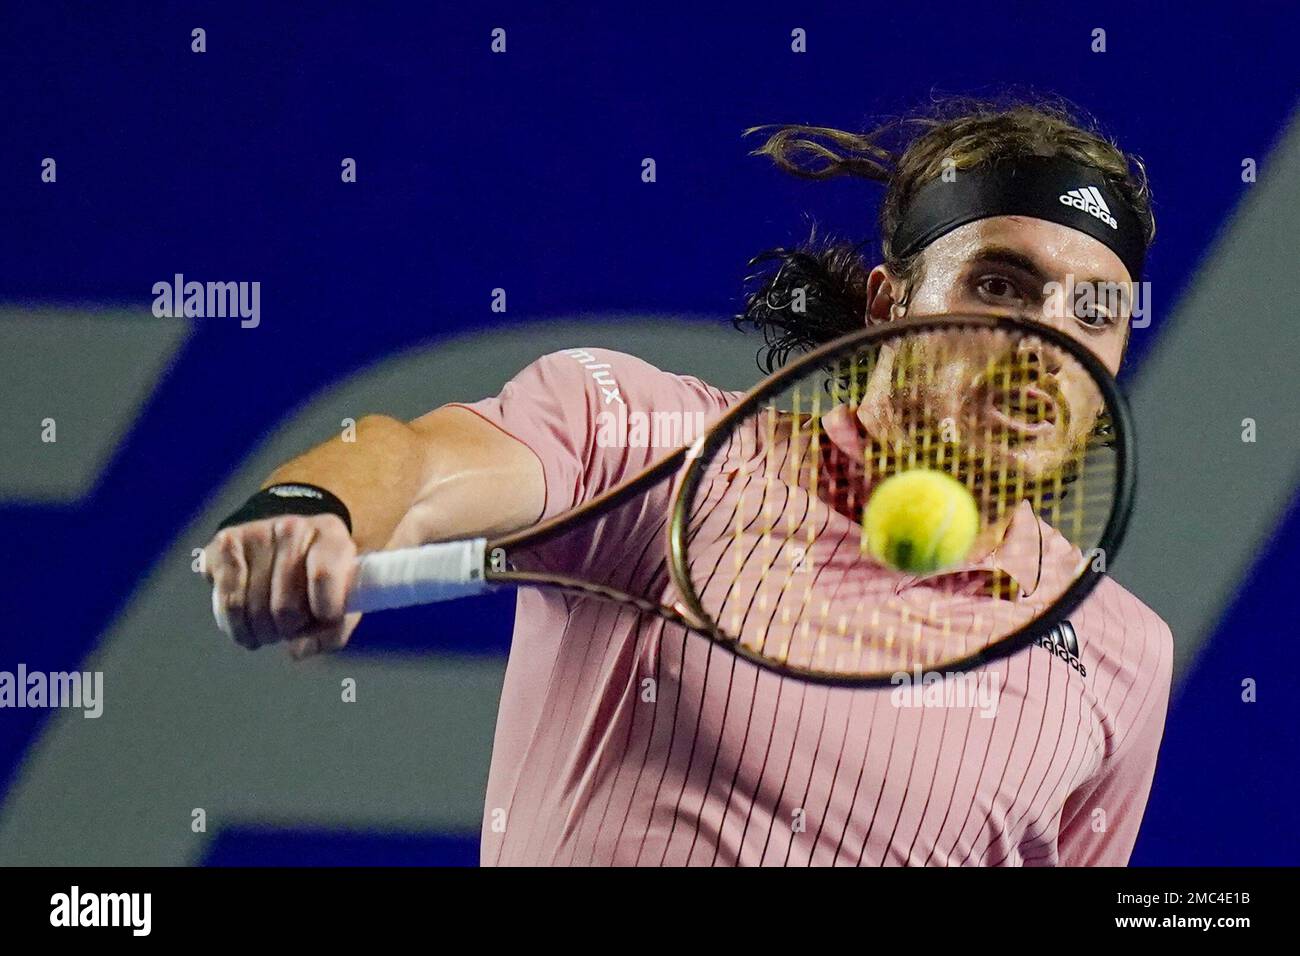 Greeces Stefanos Tsitsipas returns a ball during his semifinal match against Britains Cameron Norrie at the Mexican Open tennis tournament in Acapulco, Mexico, Friday, Feb